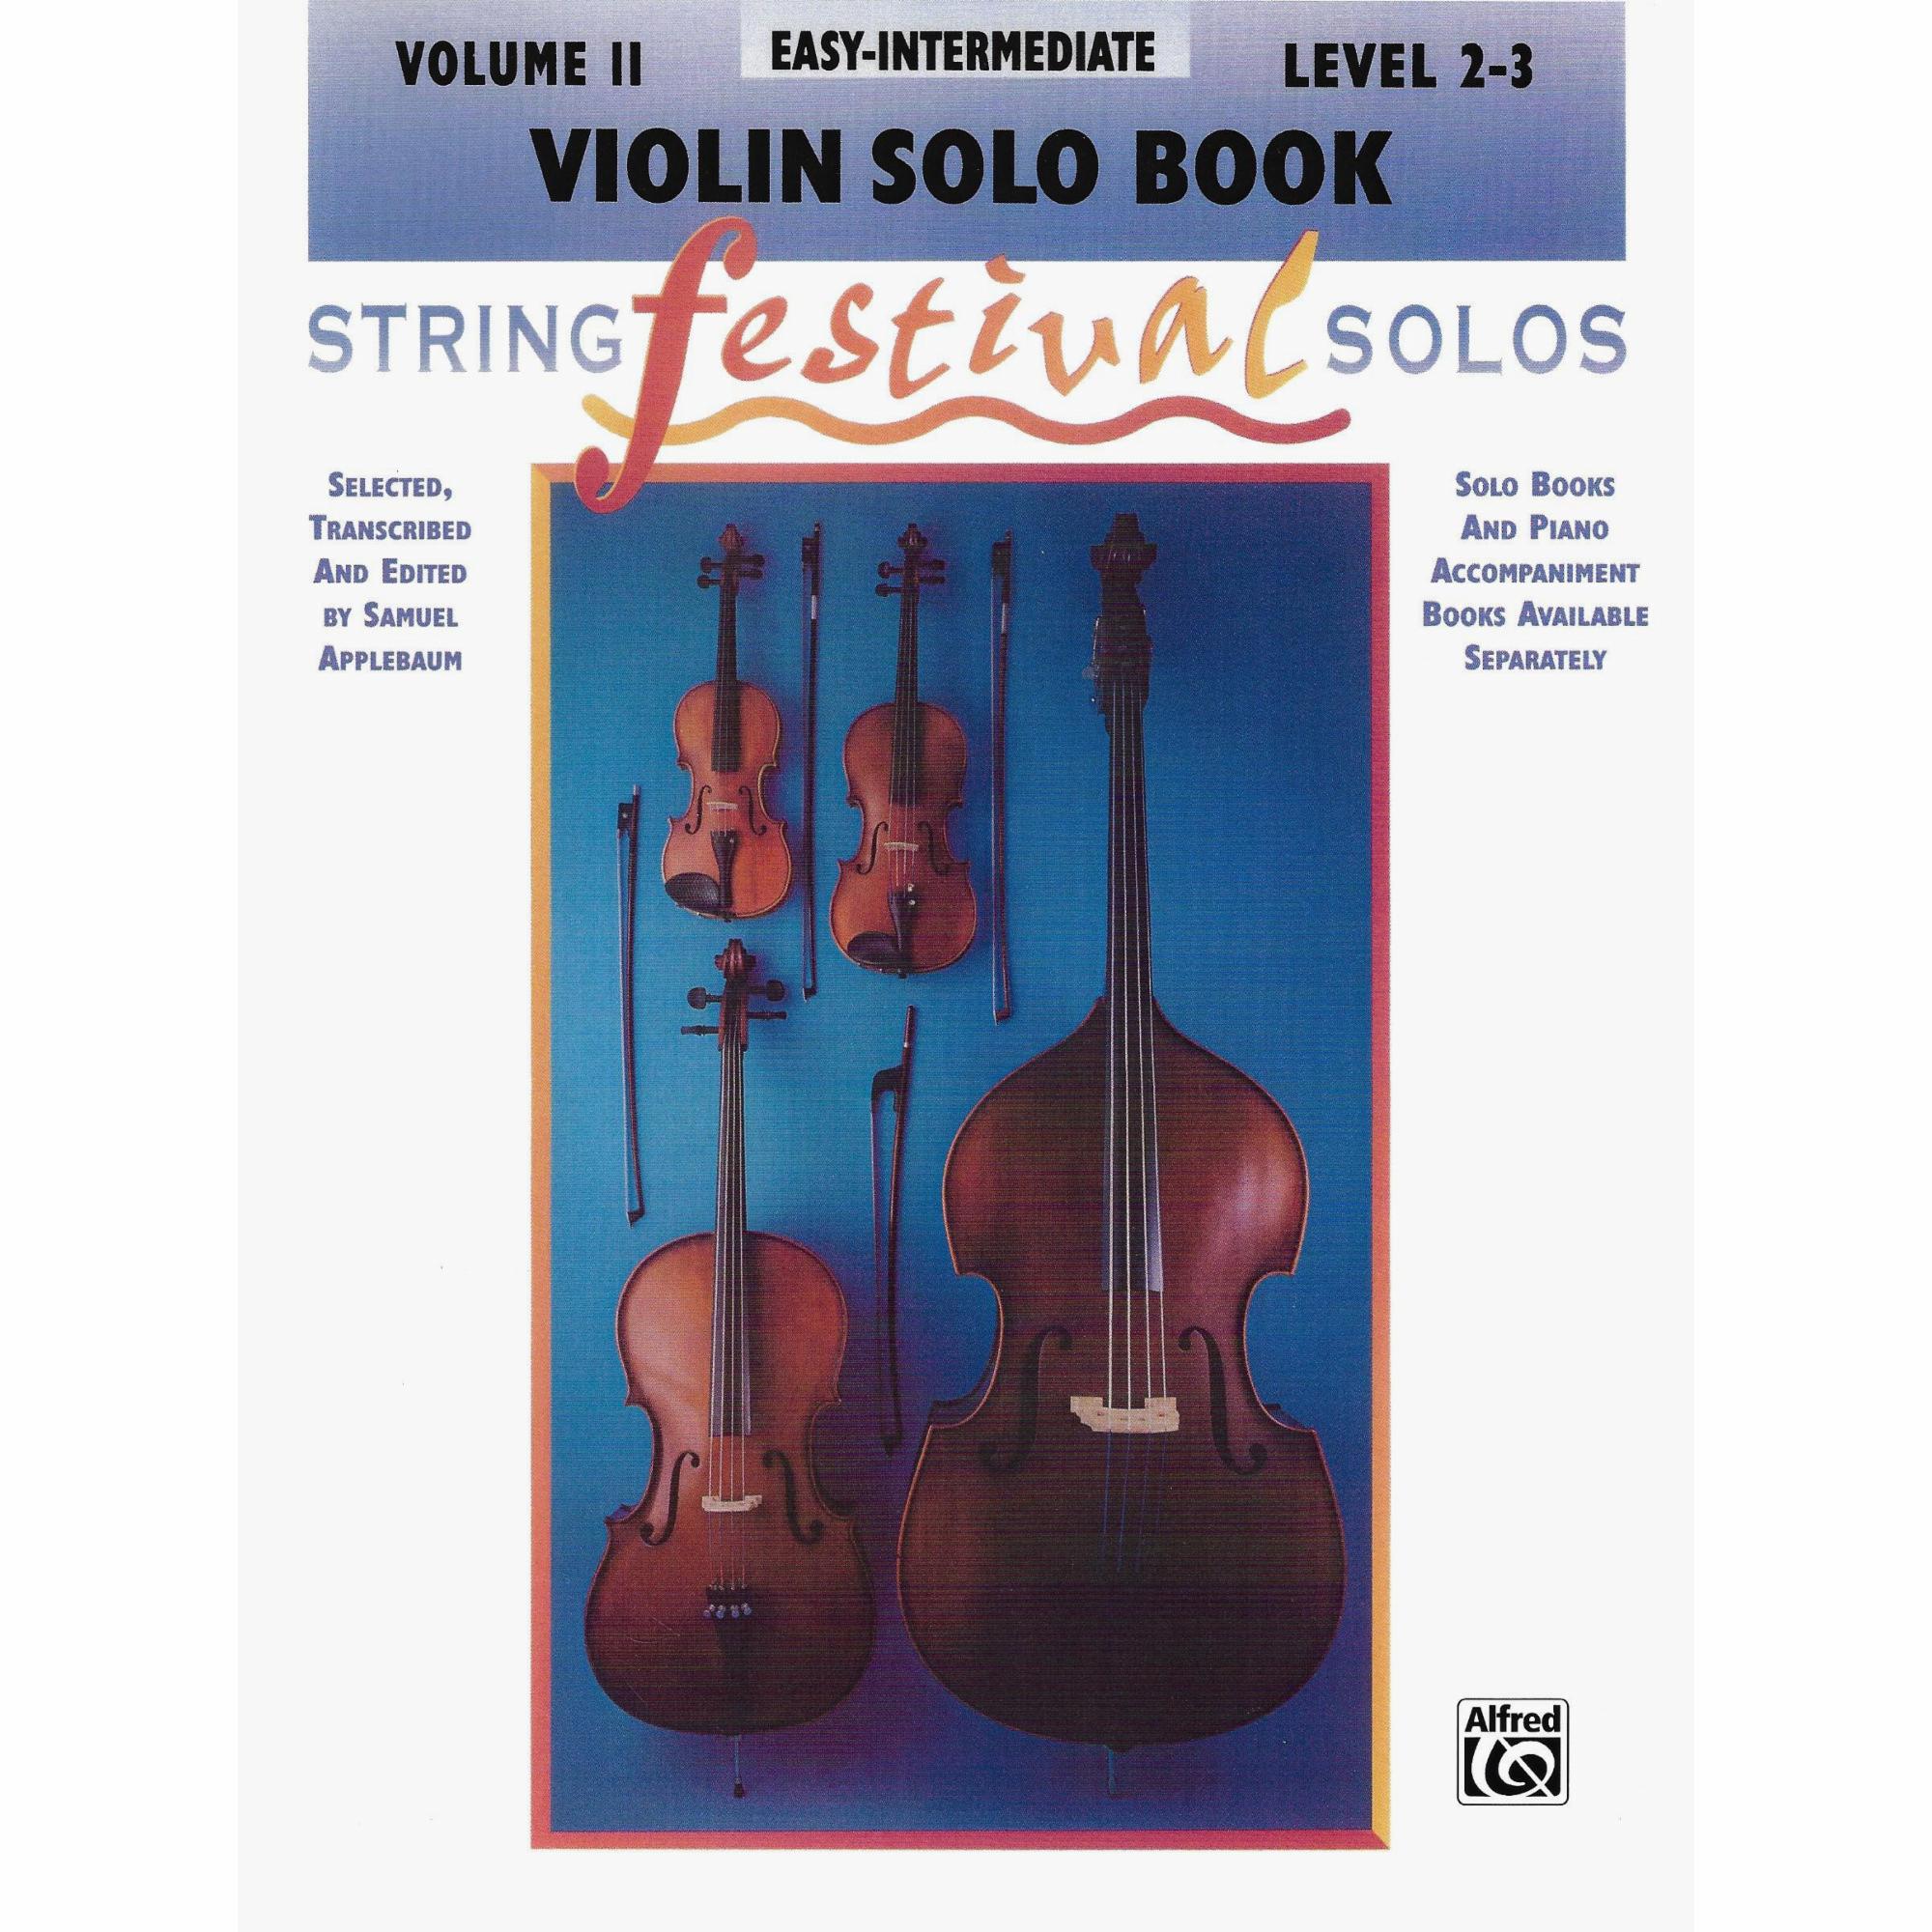 String Festival Solos, Volumes I & II for Violin and Piano